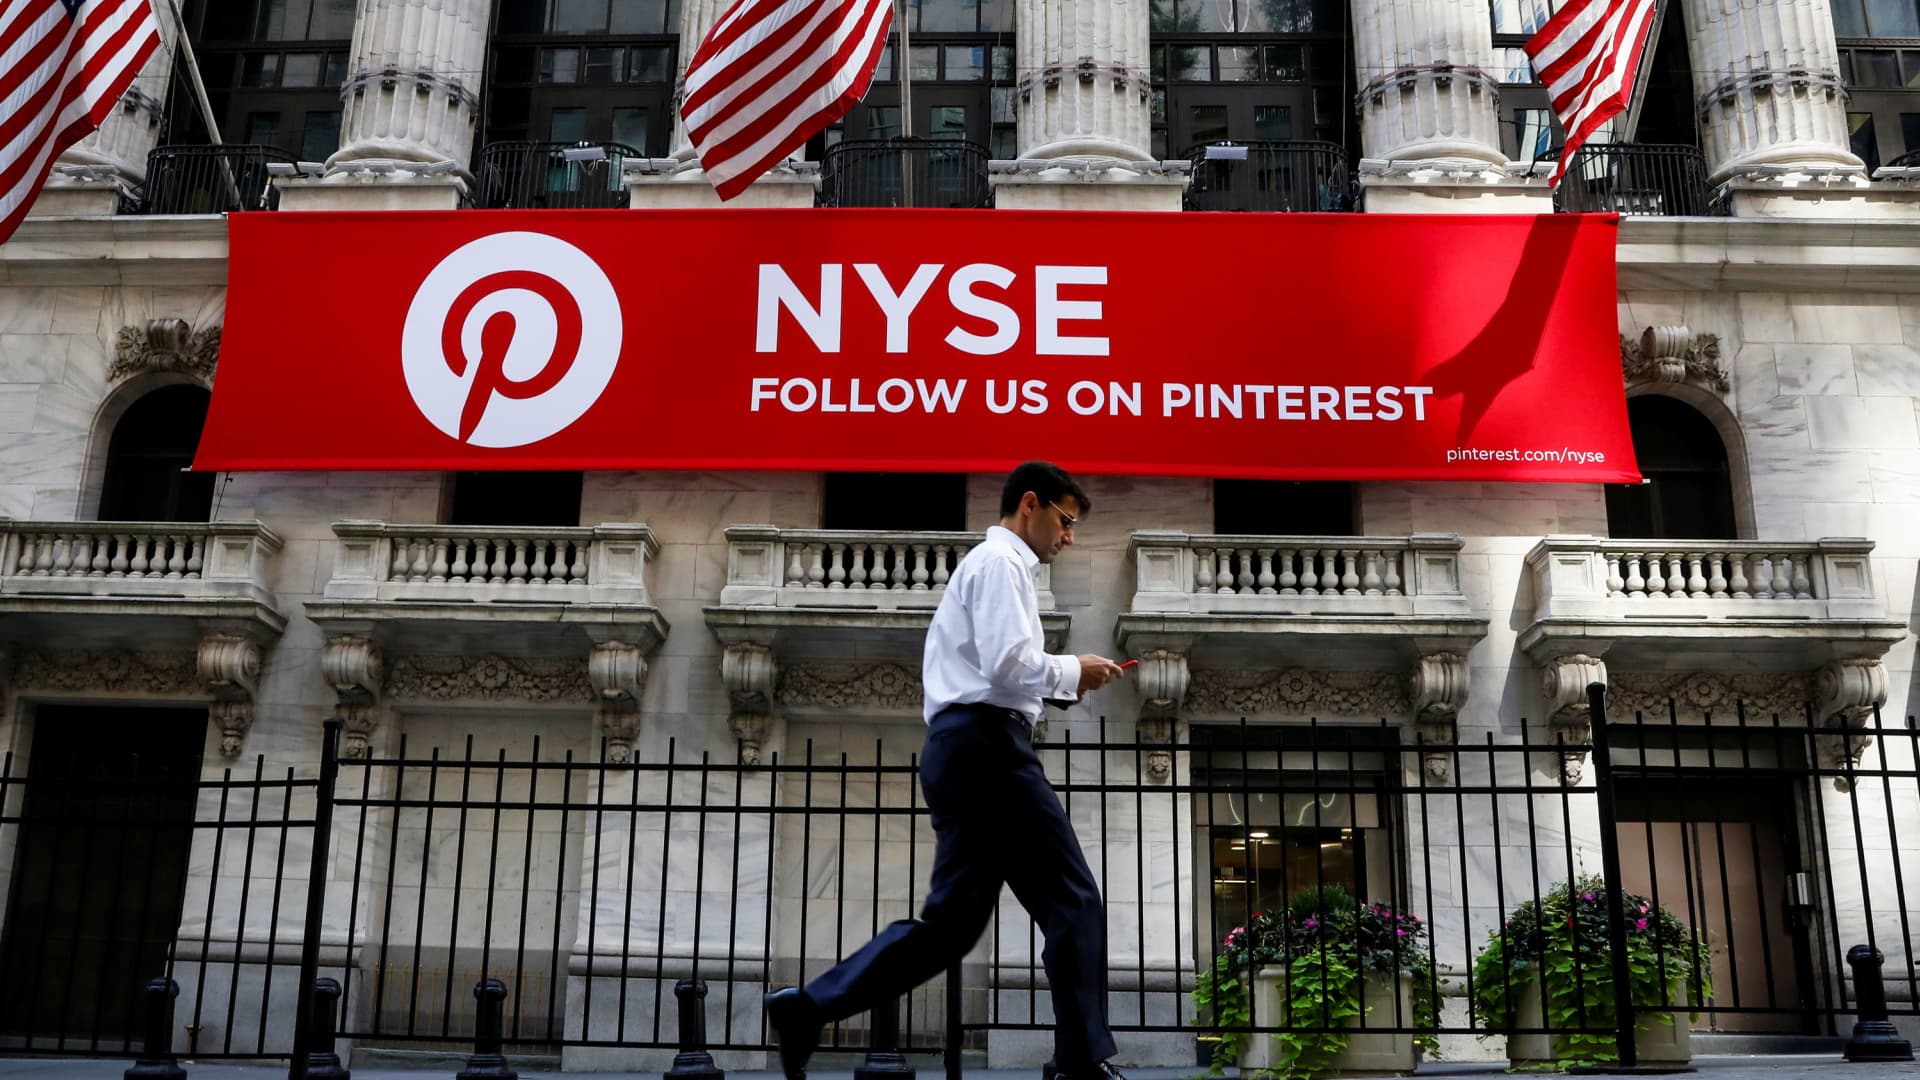 Pinterest can surge 25% as user engagement and monetization improve, Goldman says in upgrade